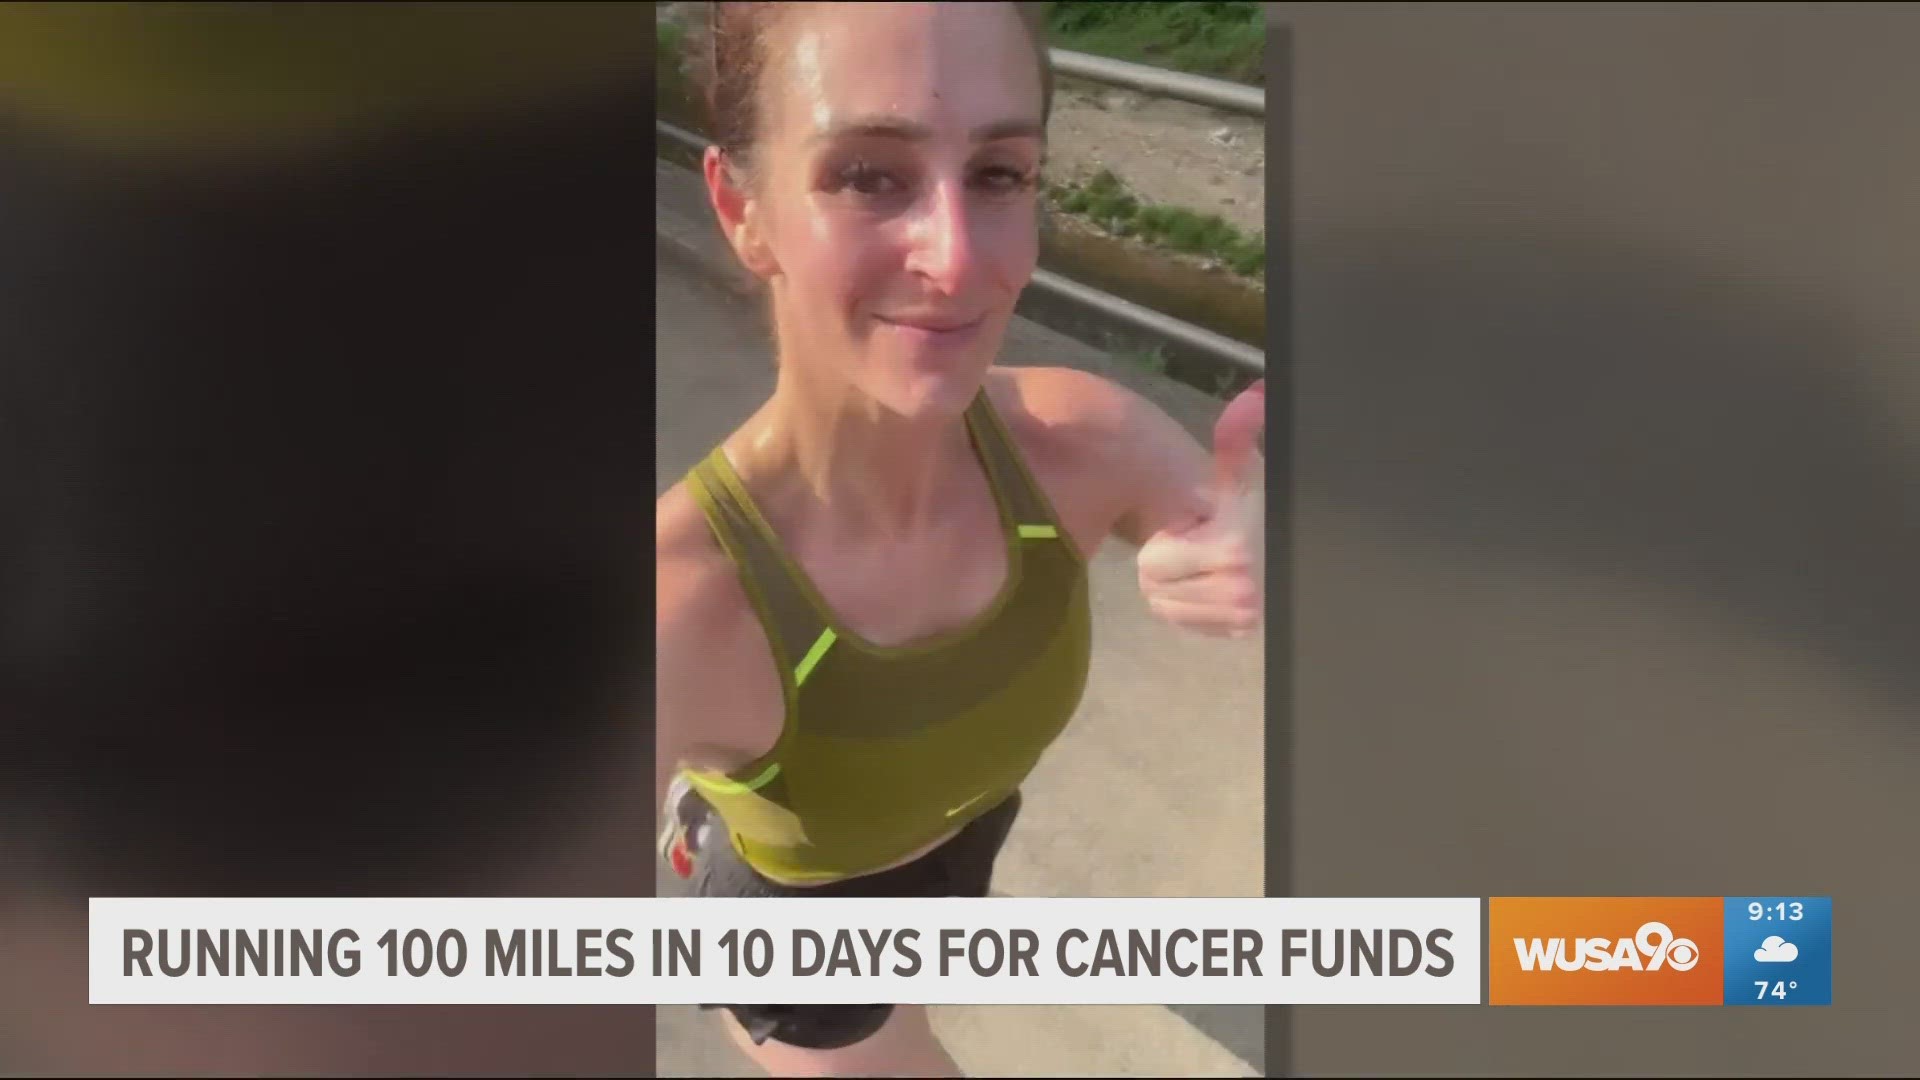 With both parents and close family friends battling cancer, Laura Resetar wanted to make a difference and raise money for research by running 100 miles in 10 days.